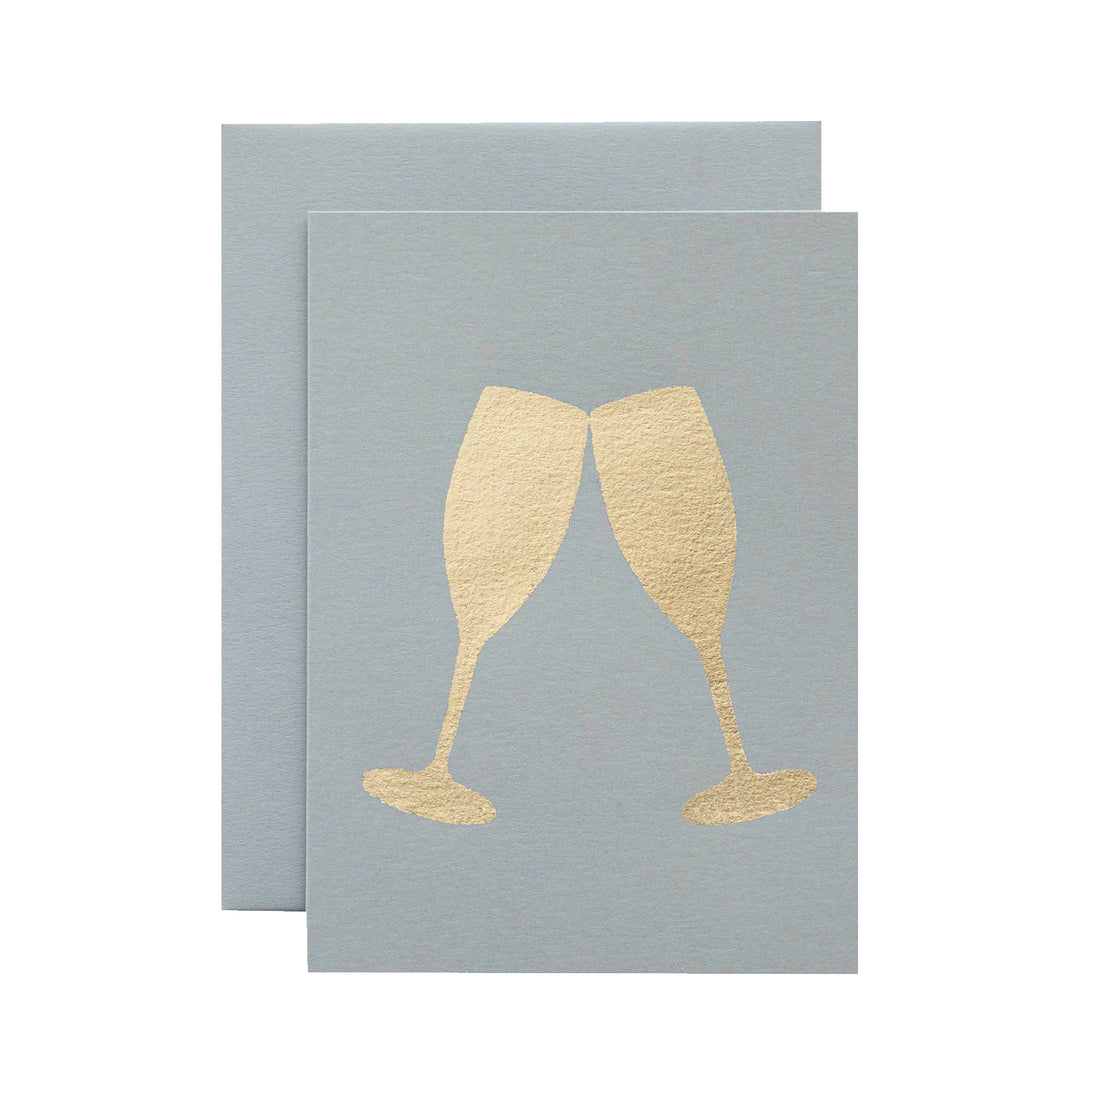 A light gray card with the silhouette of two champagne glasses touching at the rim in solid gold leaf.